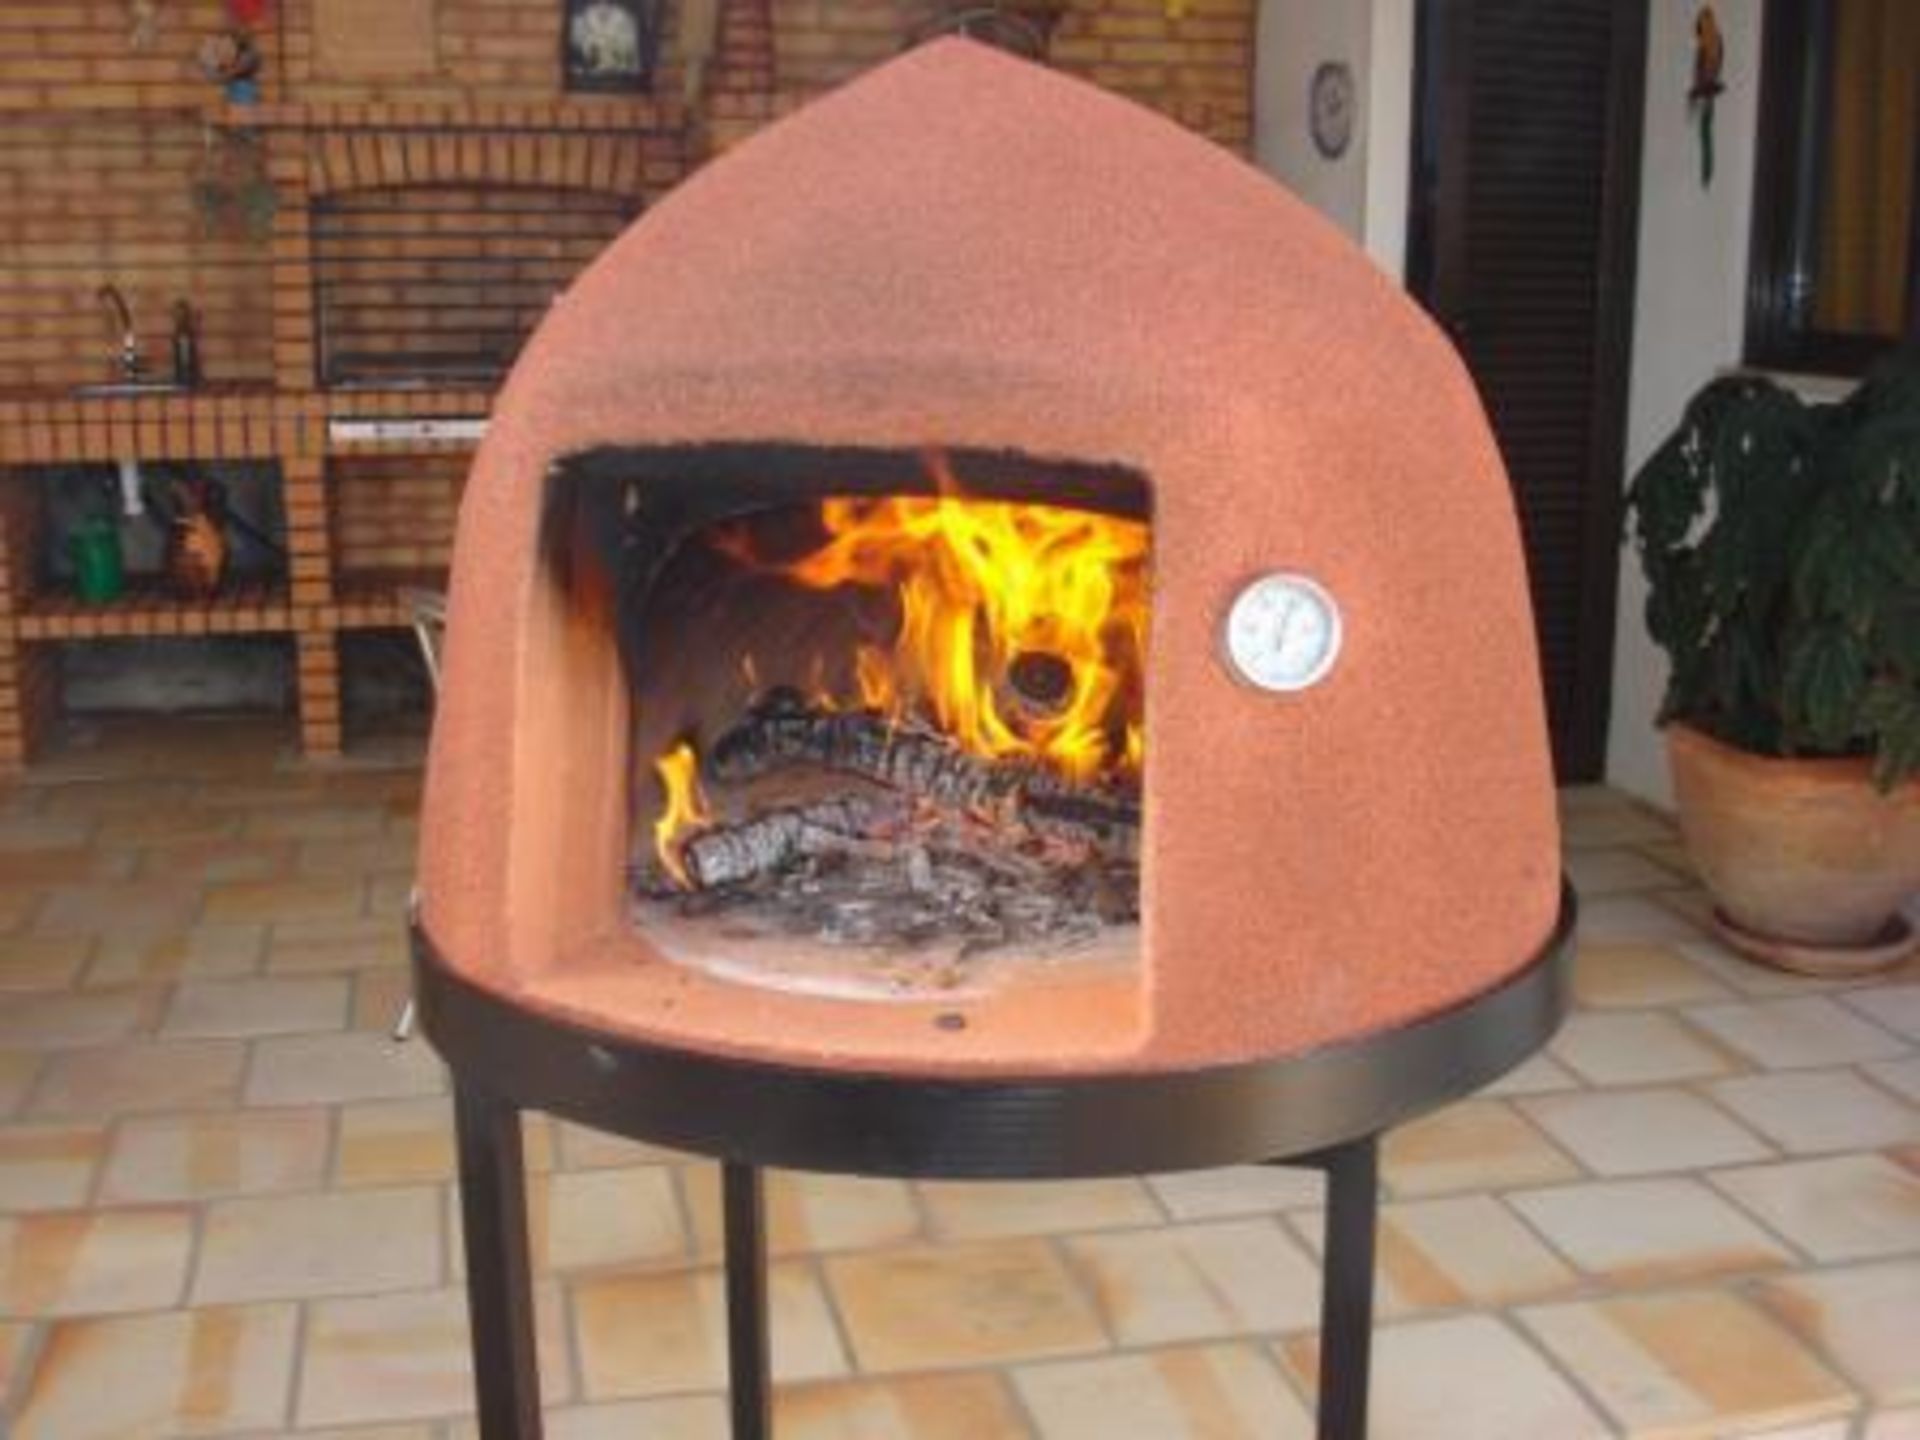 Beehive Wood Fired Pizza Oven, Insulated Construction, 27.5" Interior diameter, 35" Exterior - Image 4 of 7